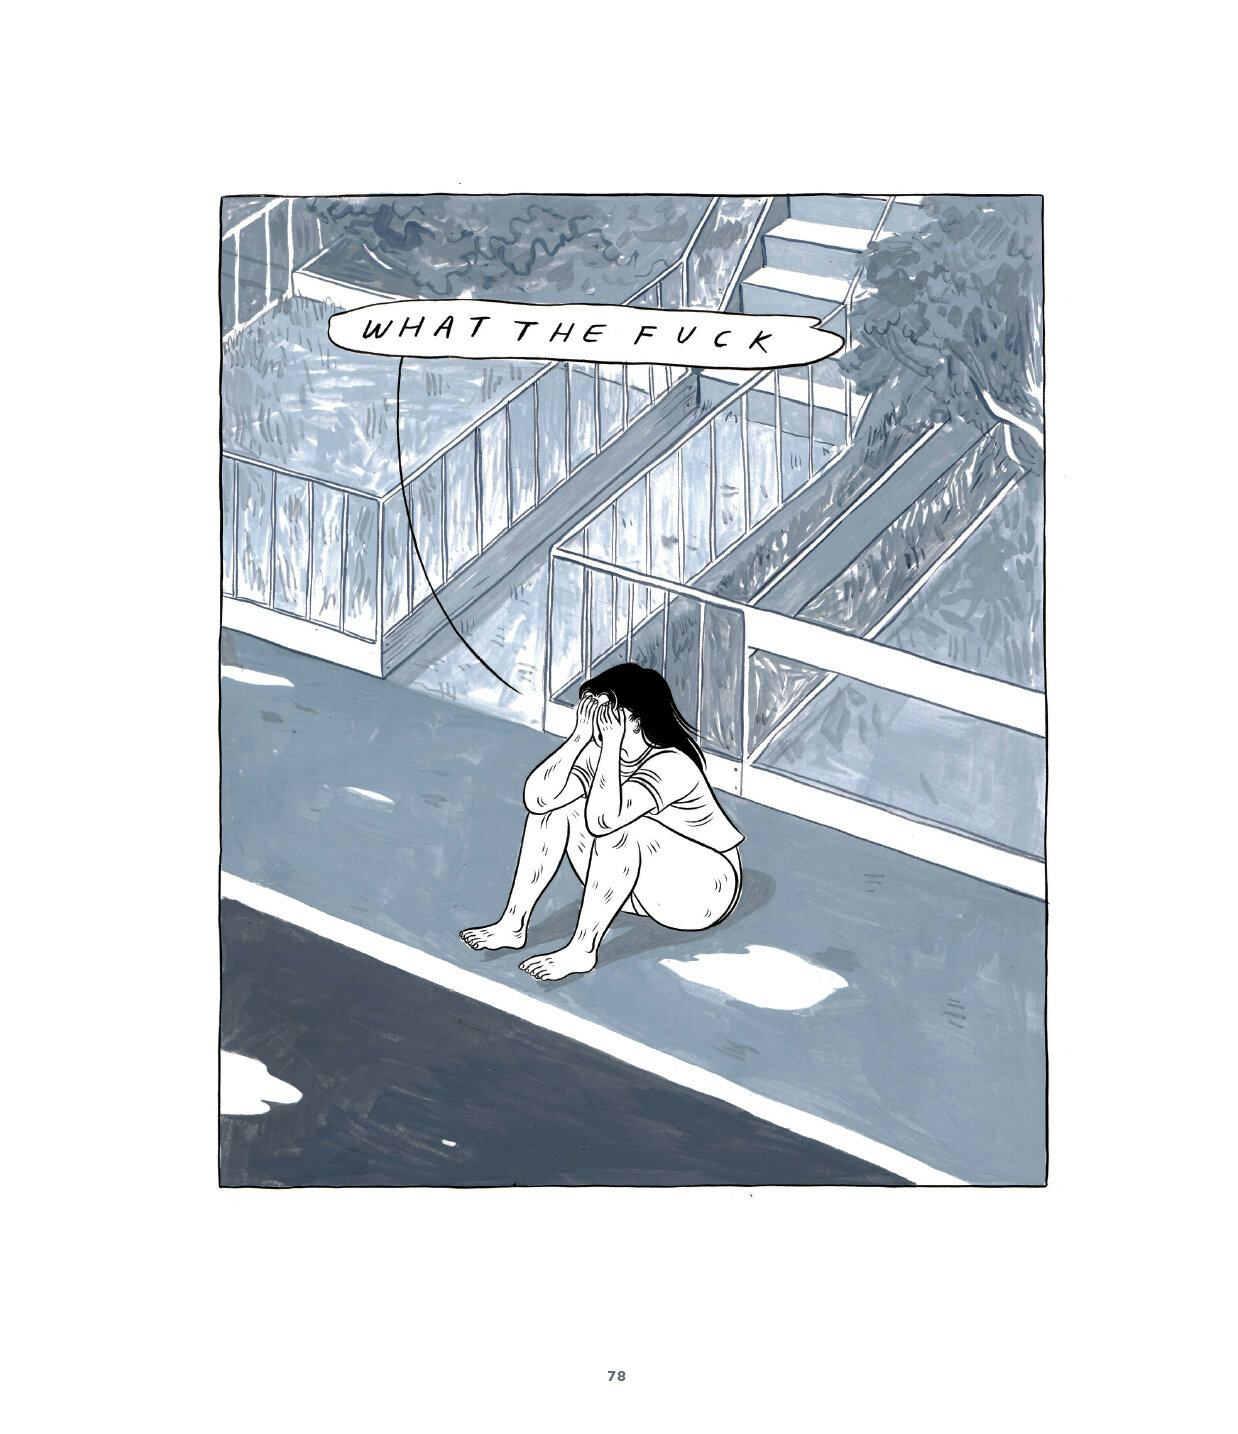 A panel from the graphic novel Stone Fruit by Lee Lai 